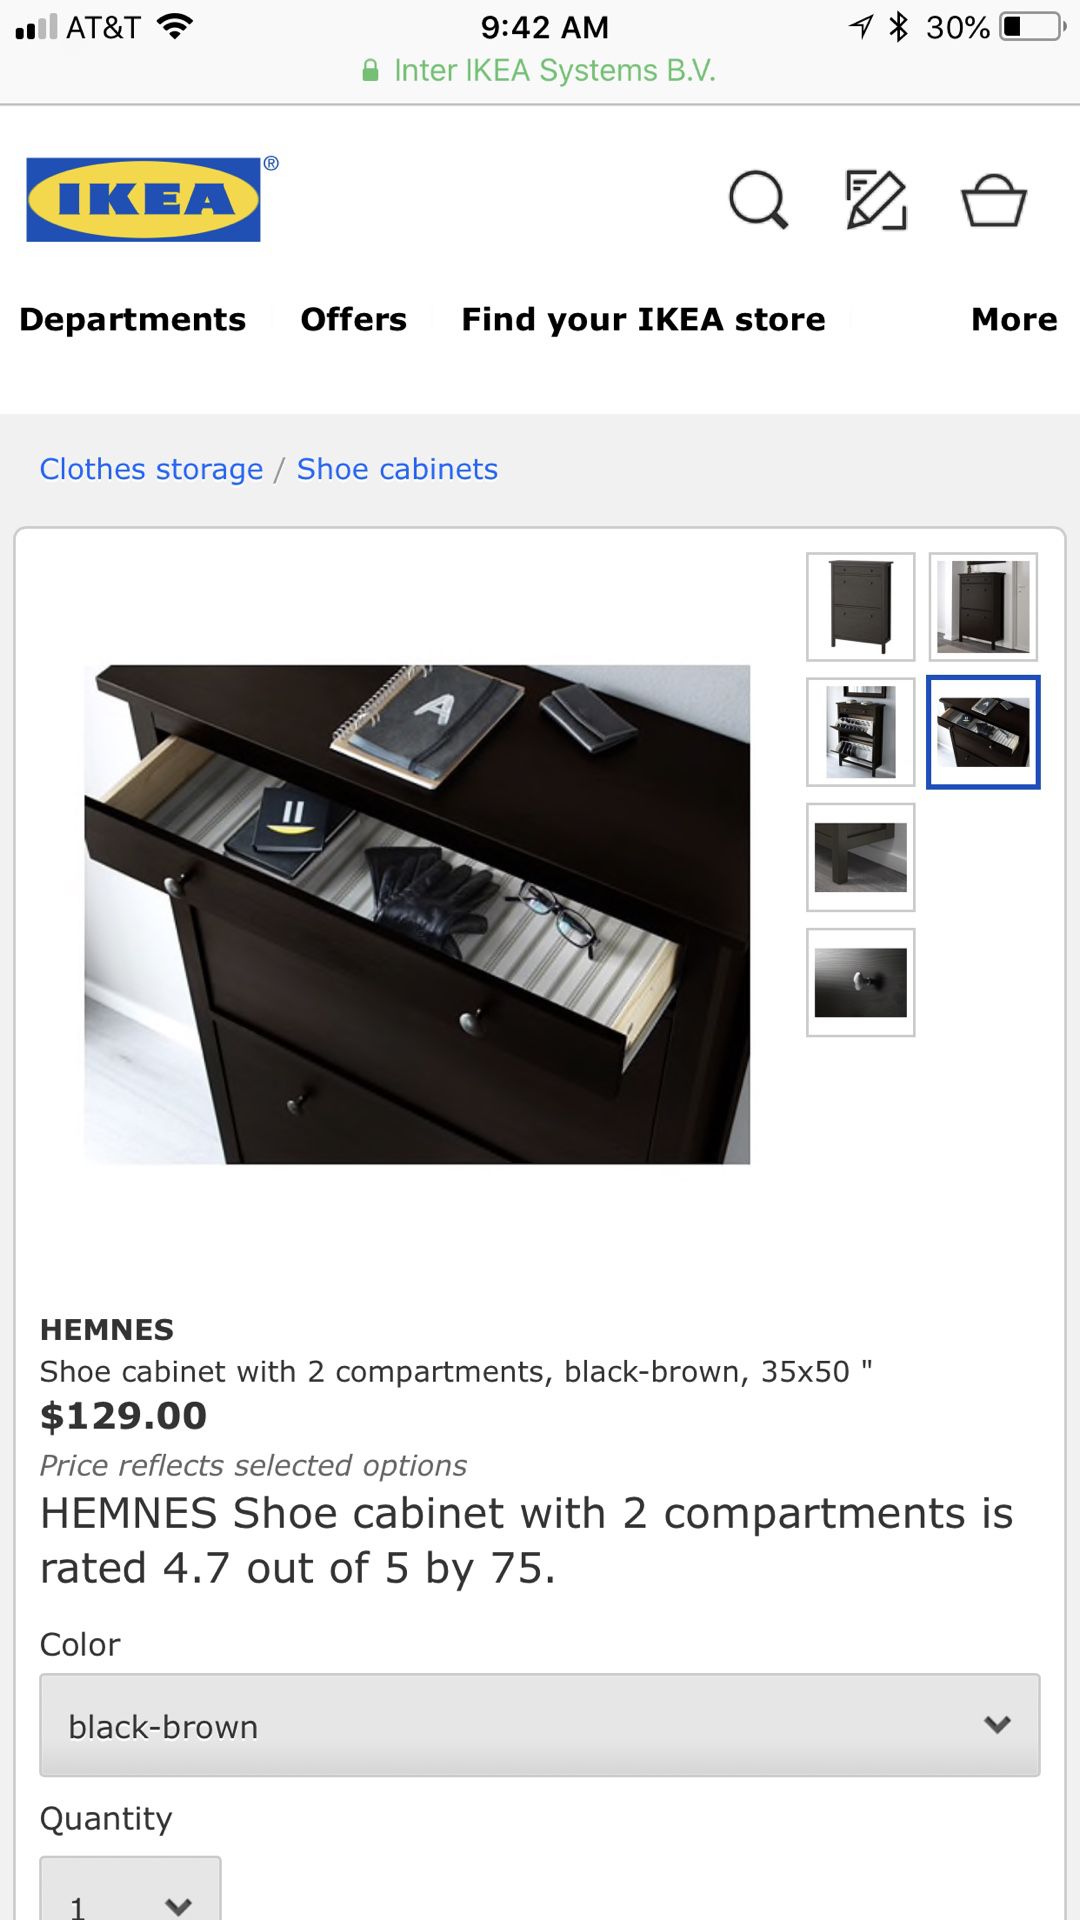 HEMNES Shoe cabinet with 2 compartments, black-brown, 35x50 - IKEA